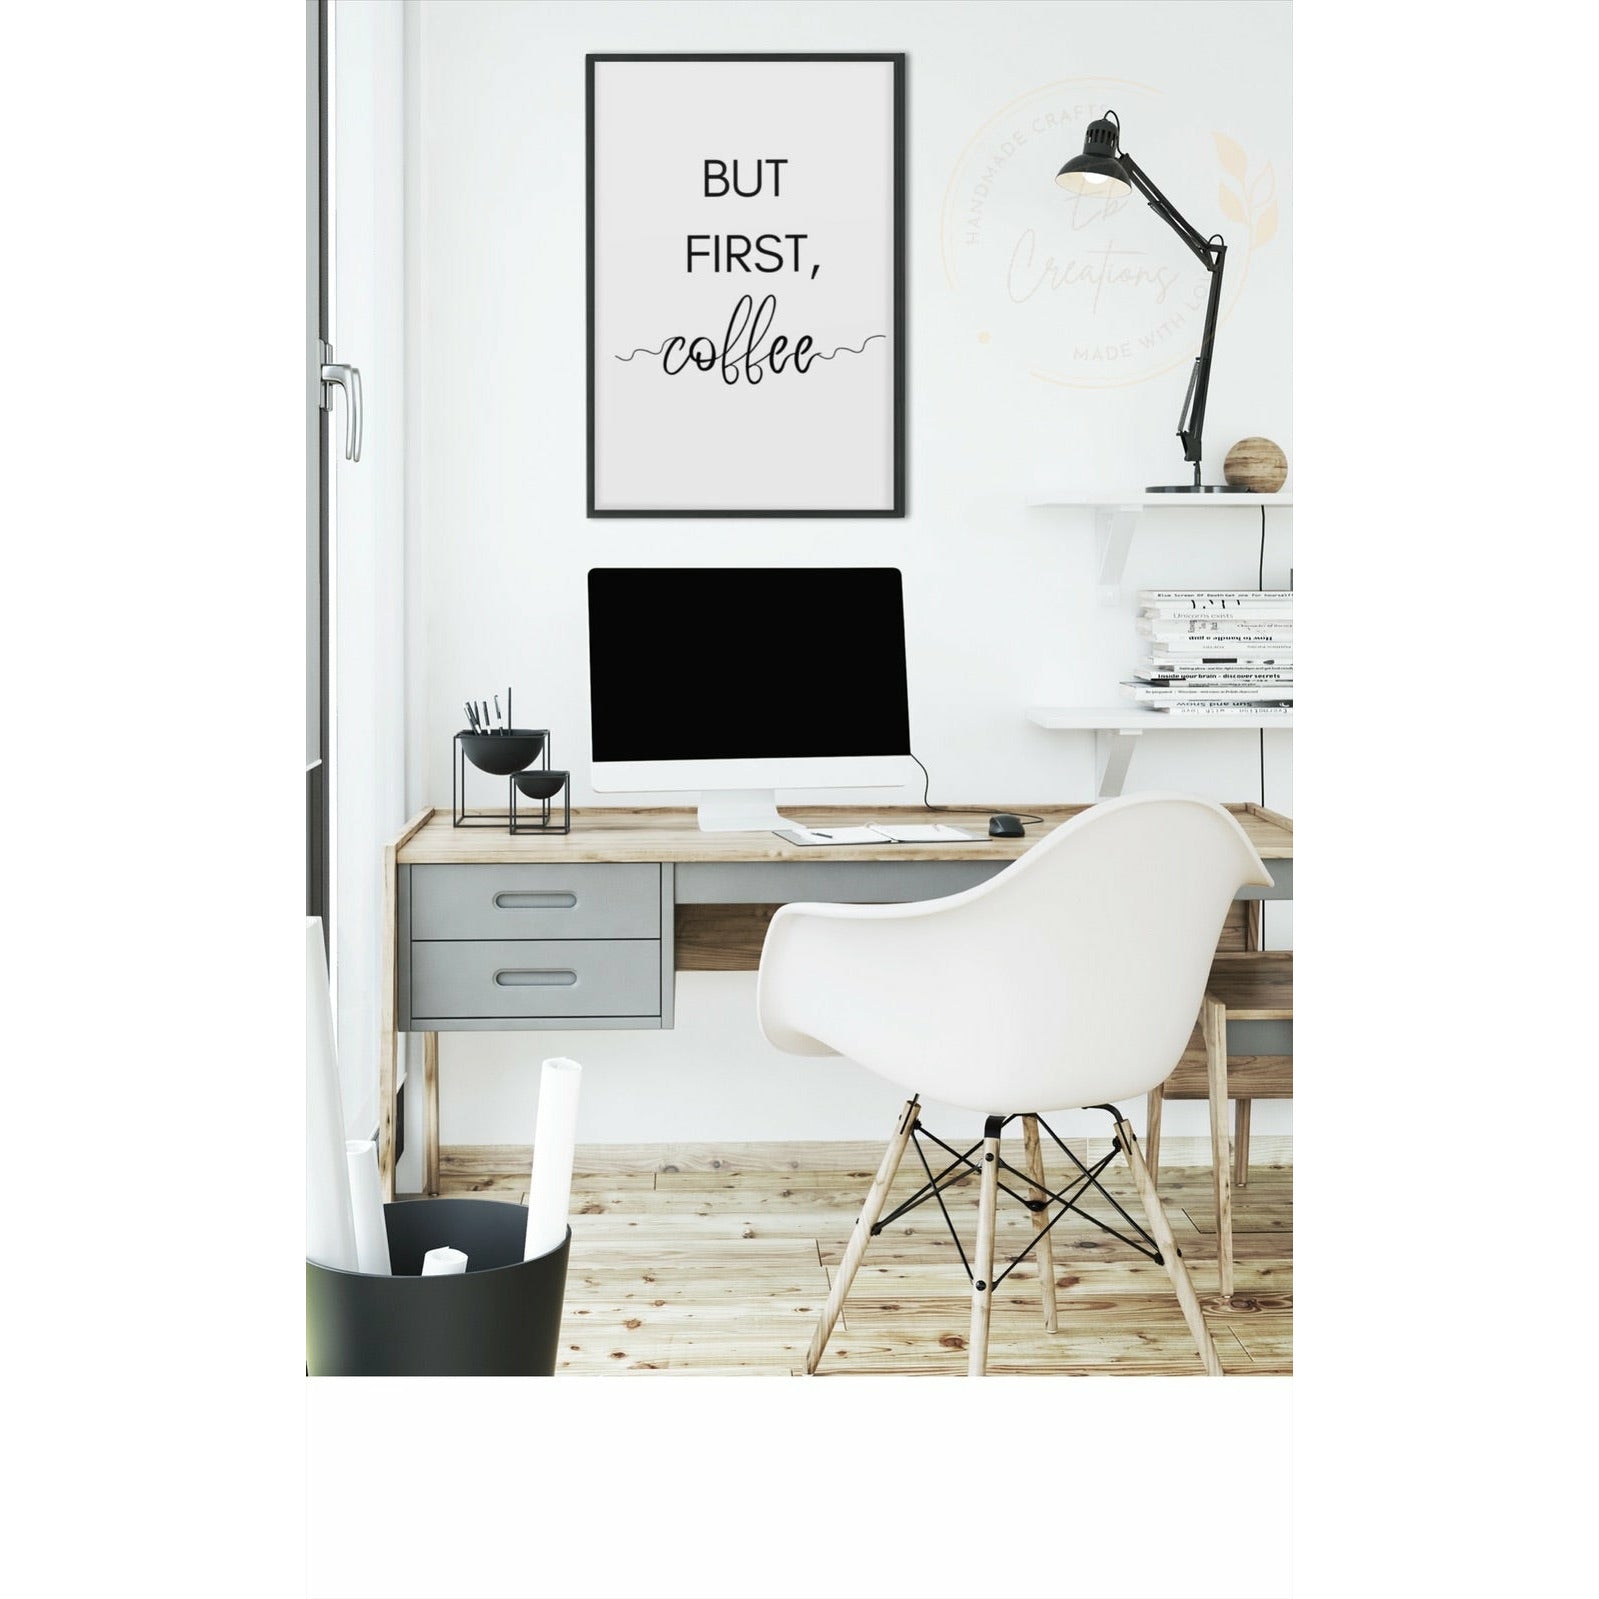 But First Coffee | Wall Art - Eb Creations Posters, Prints, & Visual Artwork But First Coffee | Wall Art